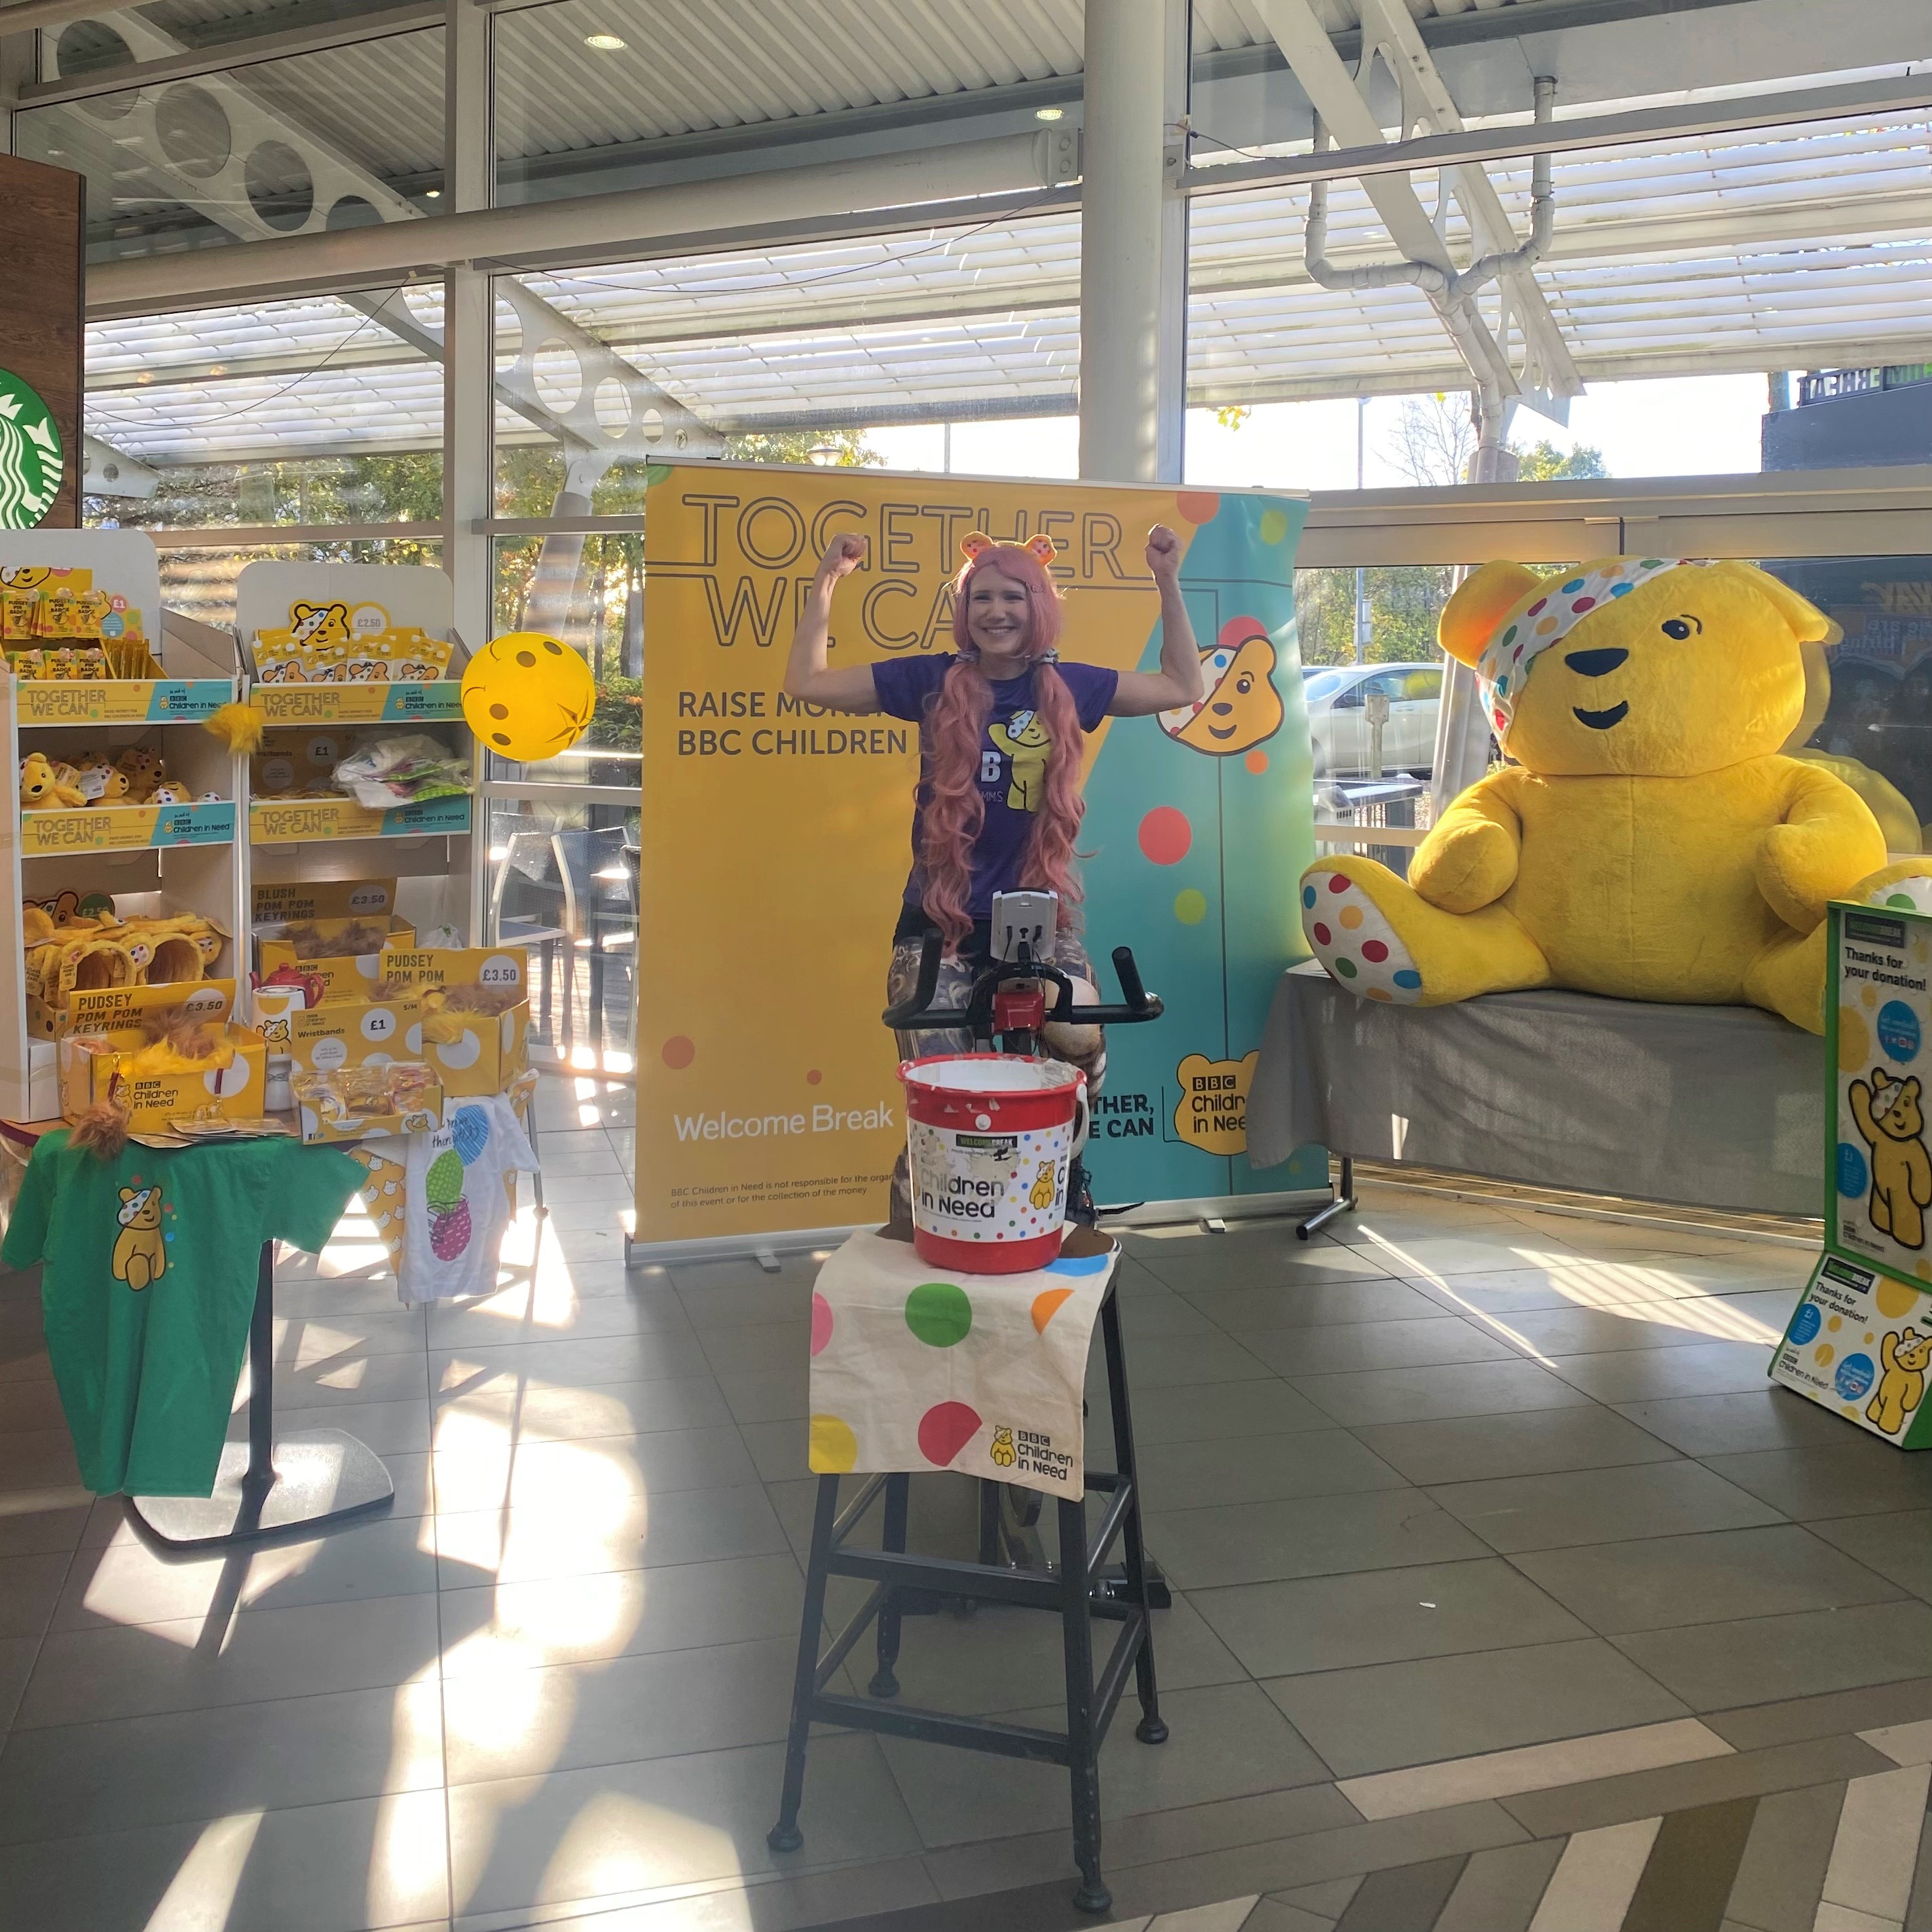 BBC Children In Need Fundraising at Welcome Break - Pedal for Pudsey